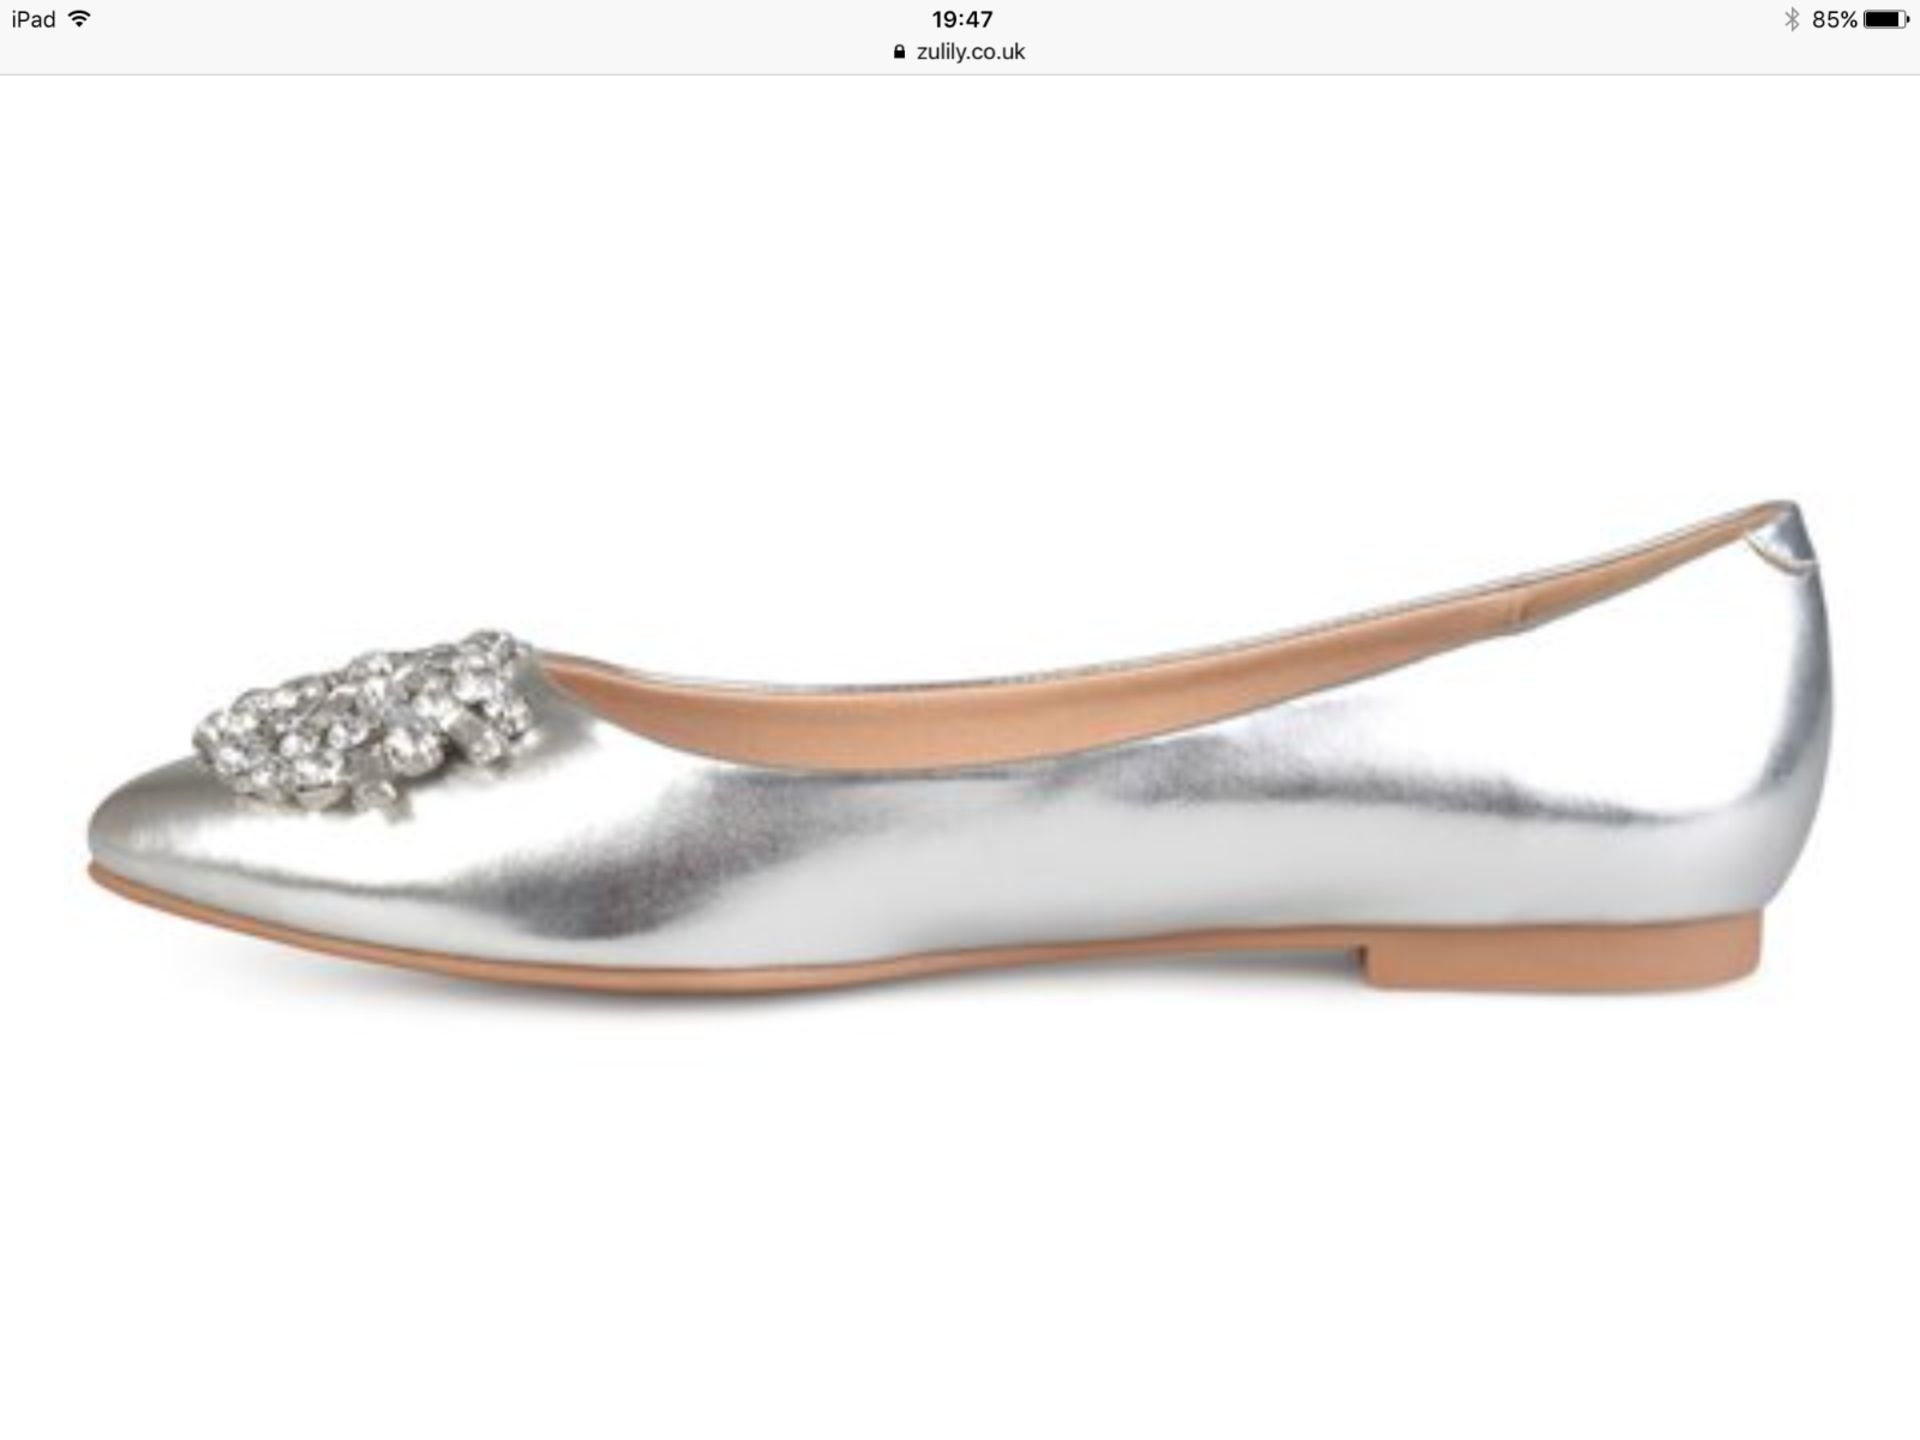 Bella Cora Silver Rena Ballet Flat, Size Uk 4.5 Us 7 (New With Box) [Ref: 53391740 G4]-Tf - Image 2 of 6